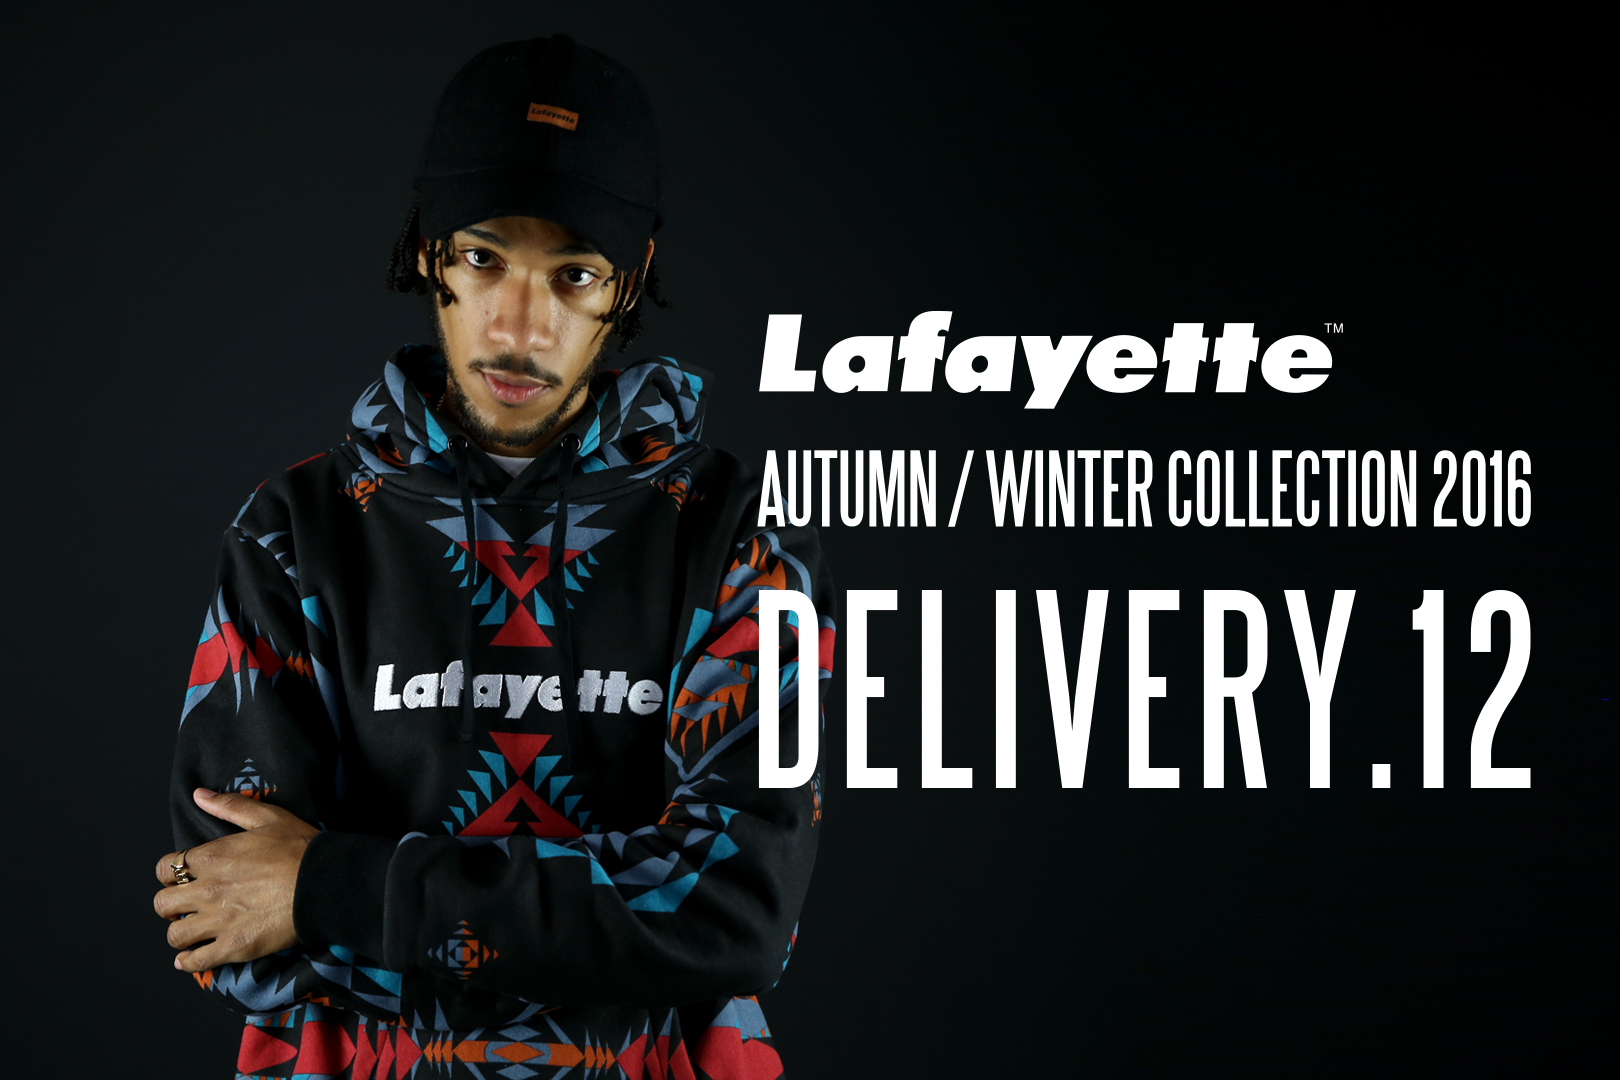 Lafayette 2016 AUTUMN/WINTER COLLECTION – DELIVERY.12